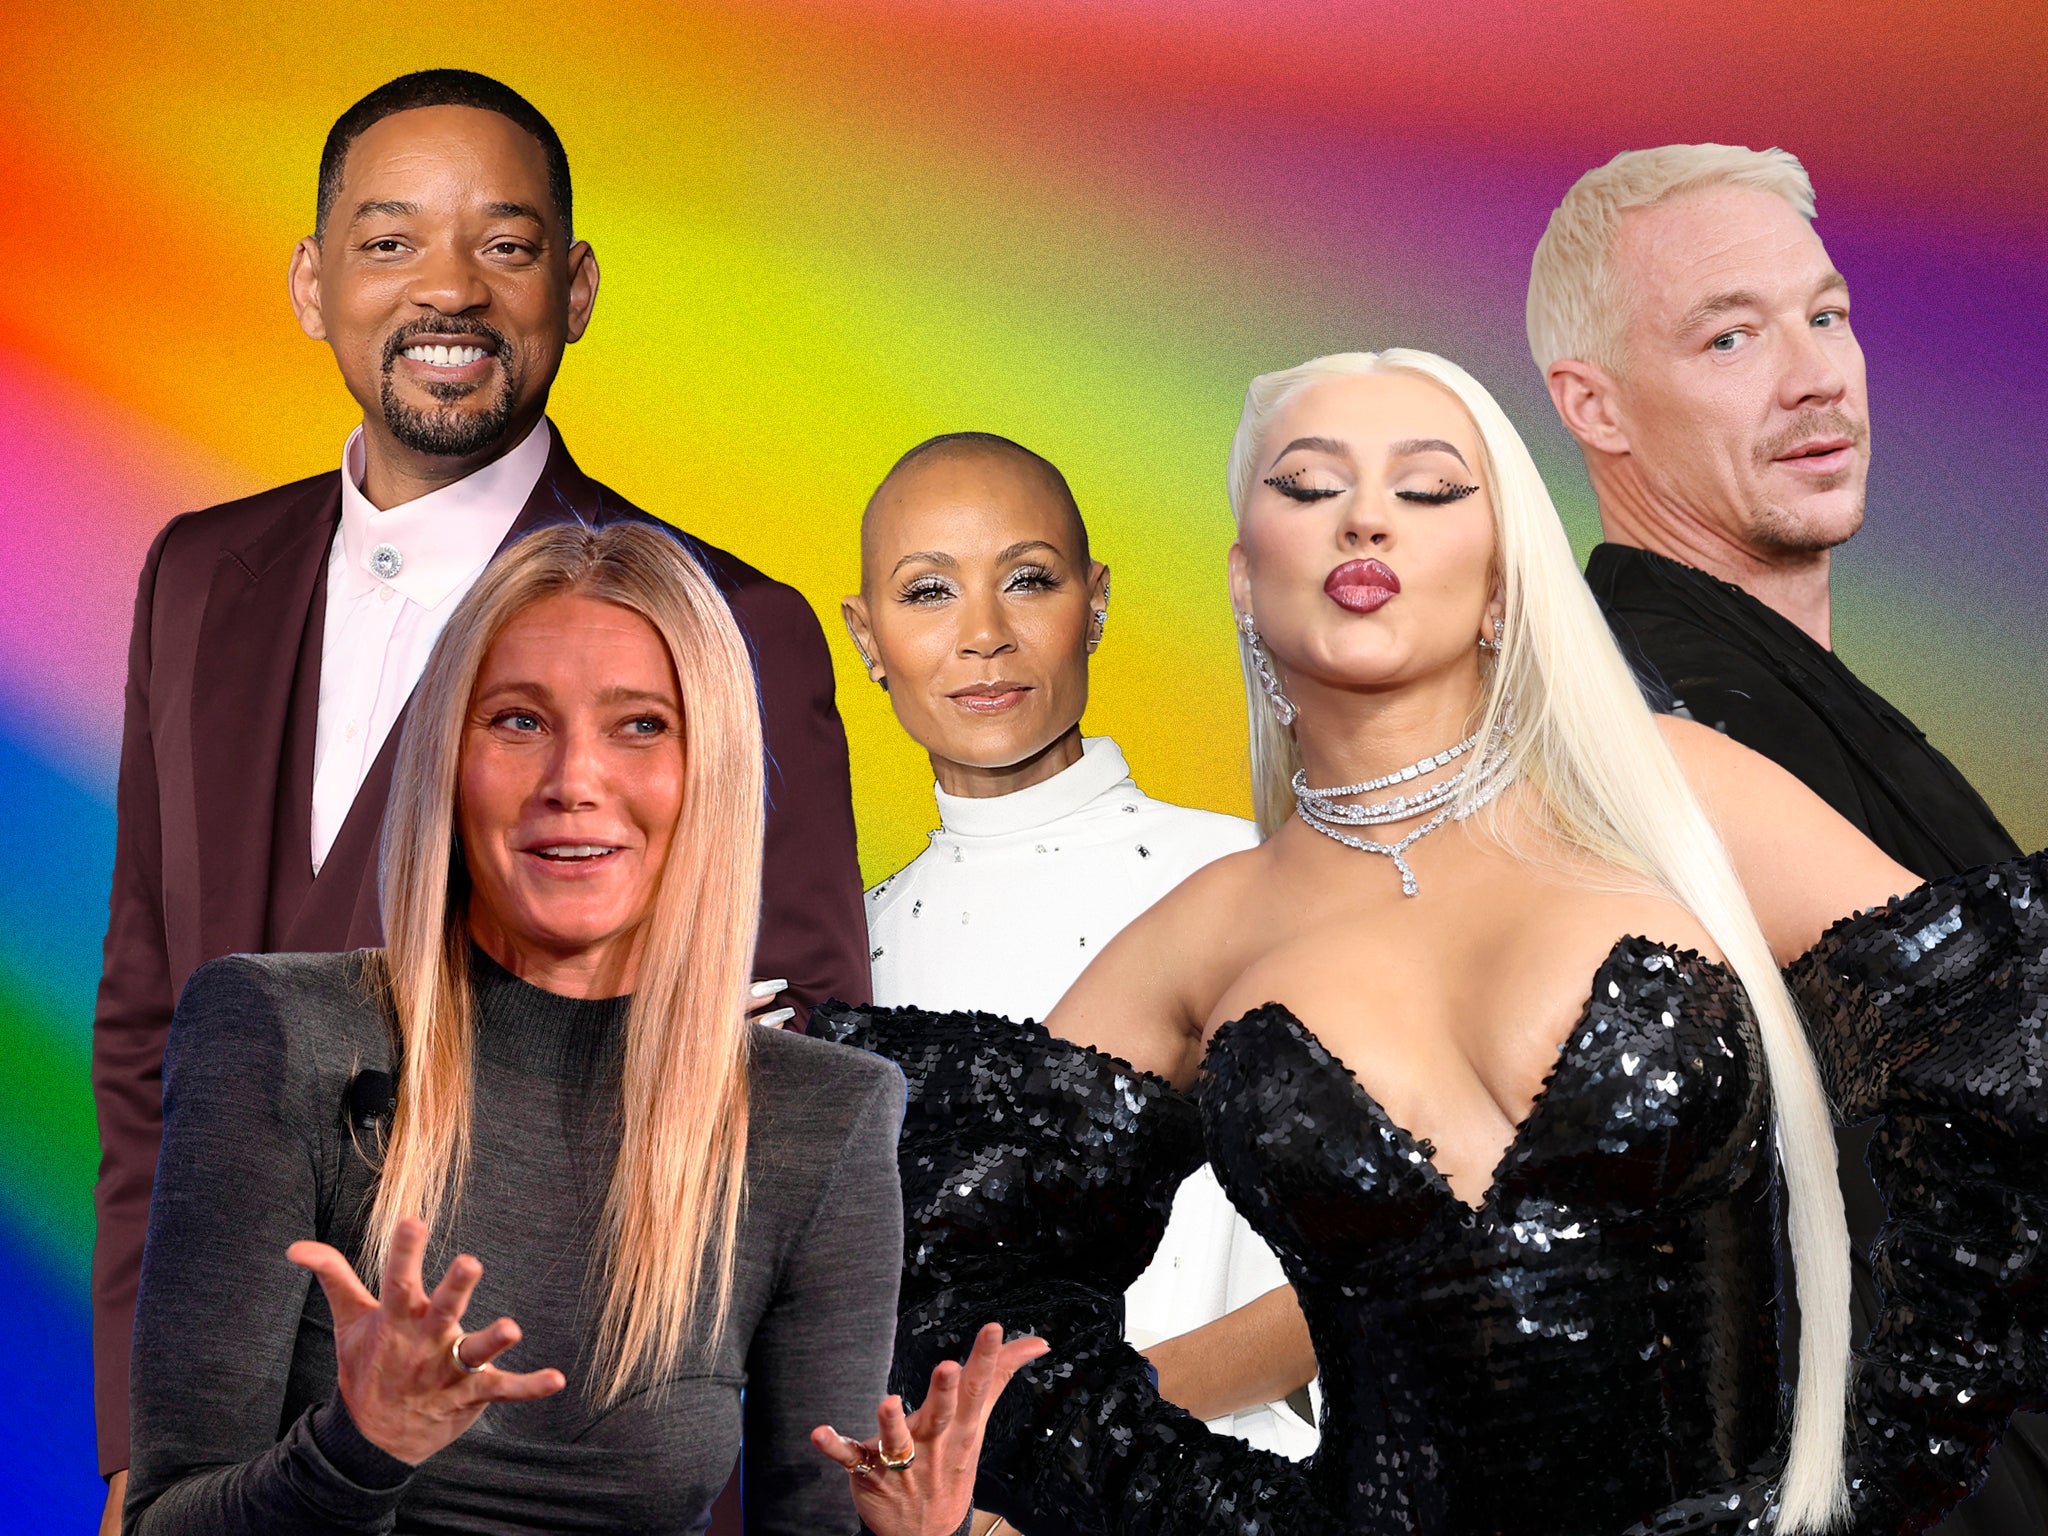 Will and Jada Pinkett Smith, Gwyneth Paltrow, Christina Aguilera and Diplo have all discussed their sex lives in graphic detail lately